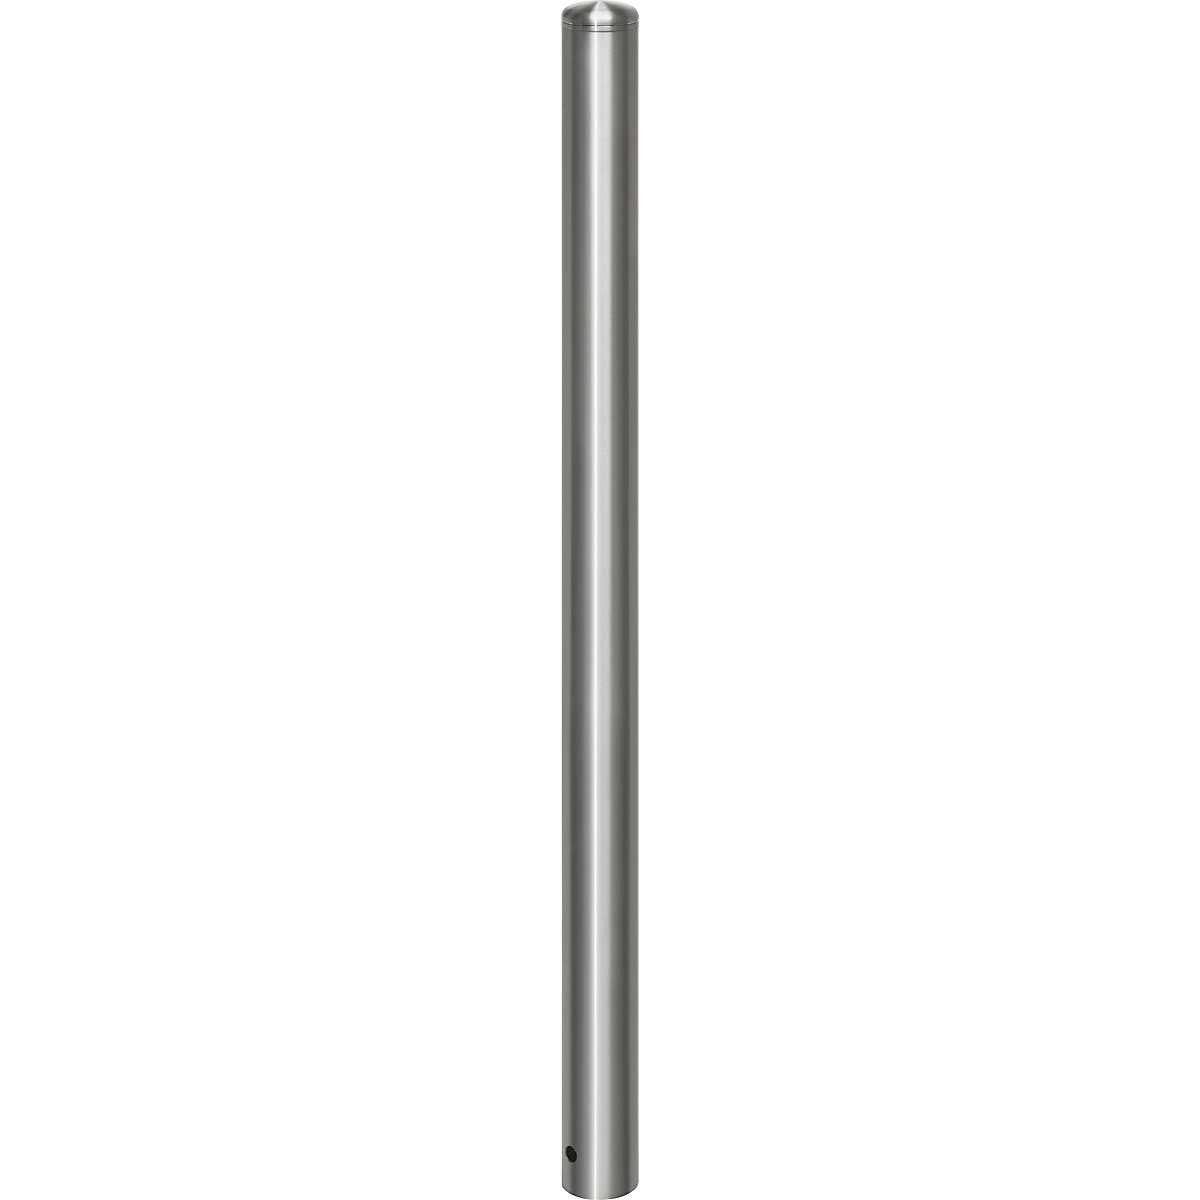 Stainless steel barrier post, with end cap, ground sleeve for concreting in, Ø 76 mm-9